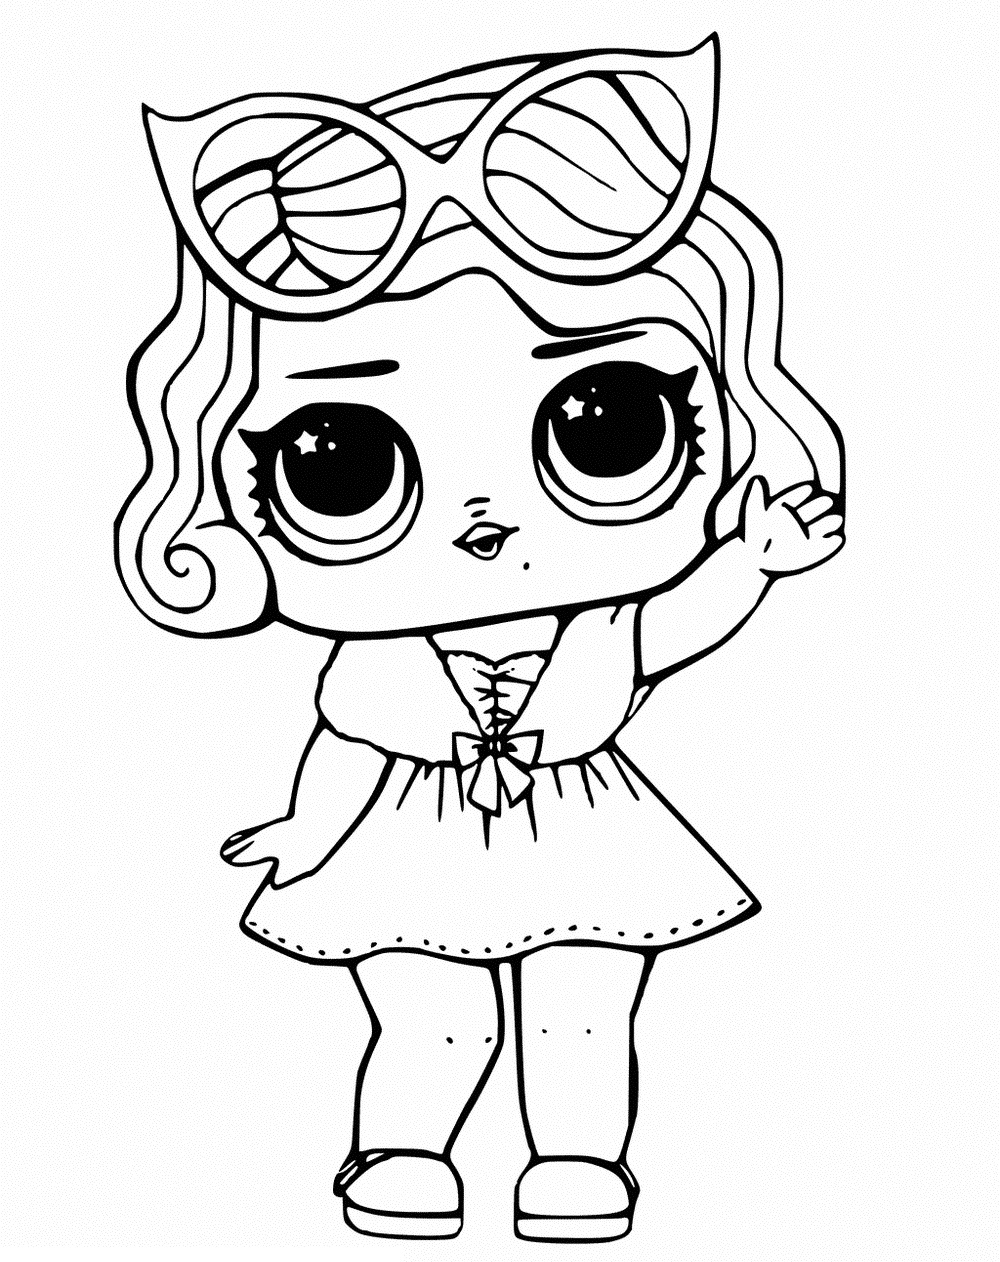 LOL Coloring Pages FREE Printable 100